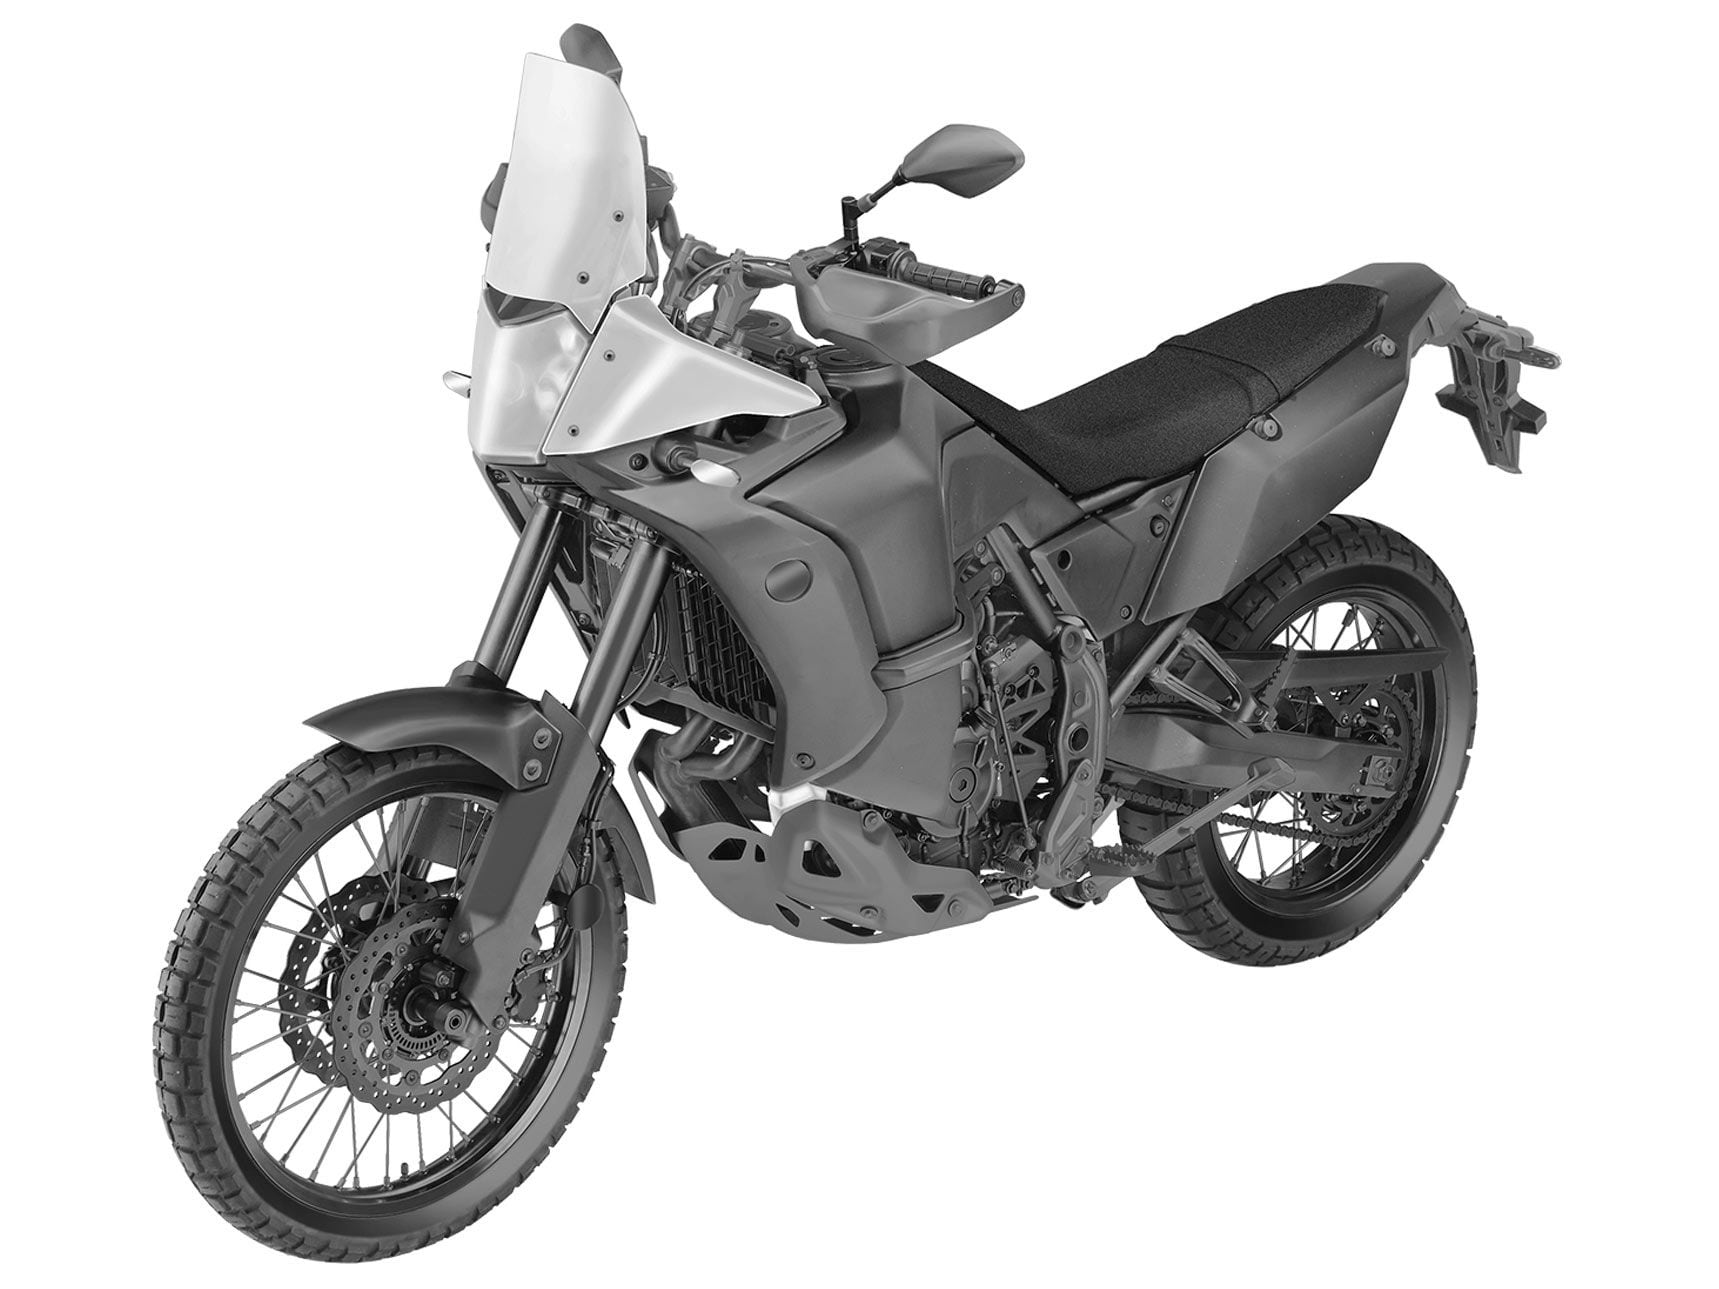 Yamaha Ténéré 700 Raid patents show a new fairing and other elements from the prototype, but running gear seems to be the same as the stock bike.